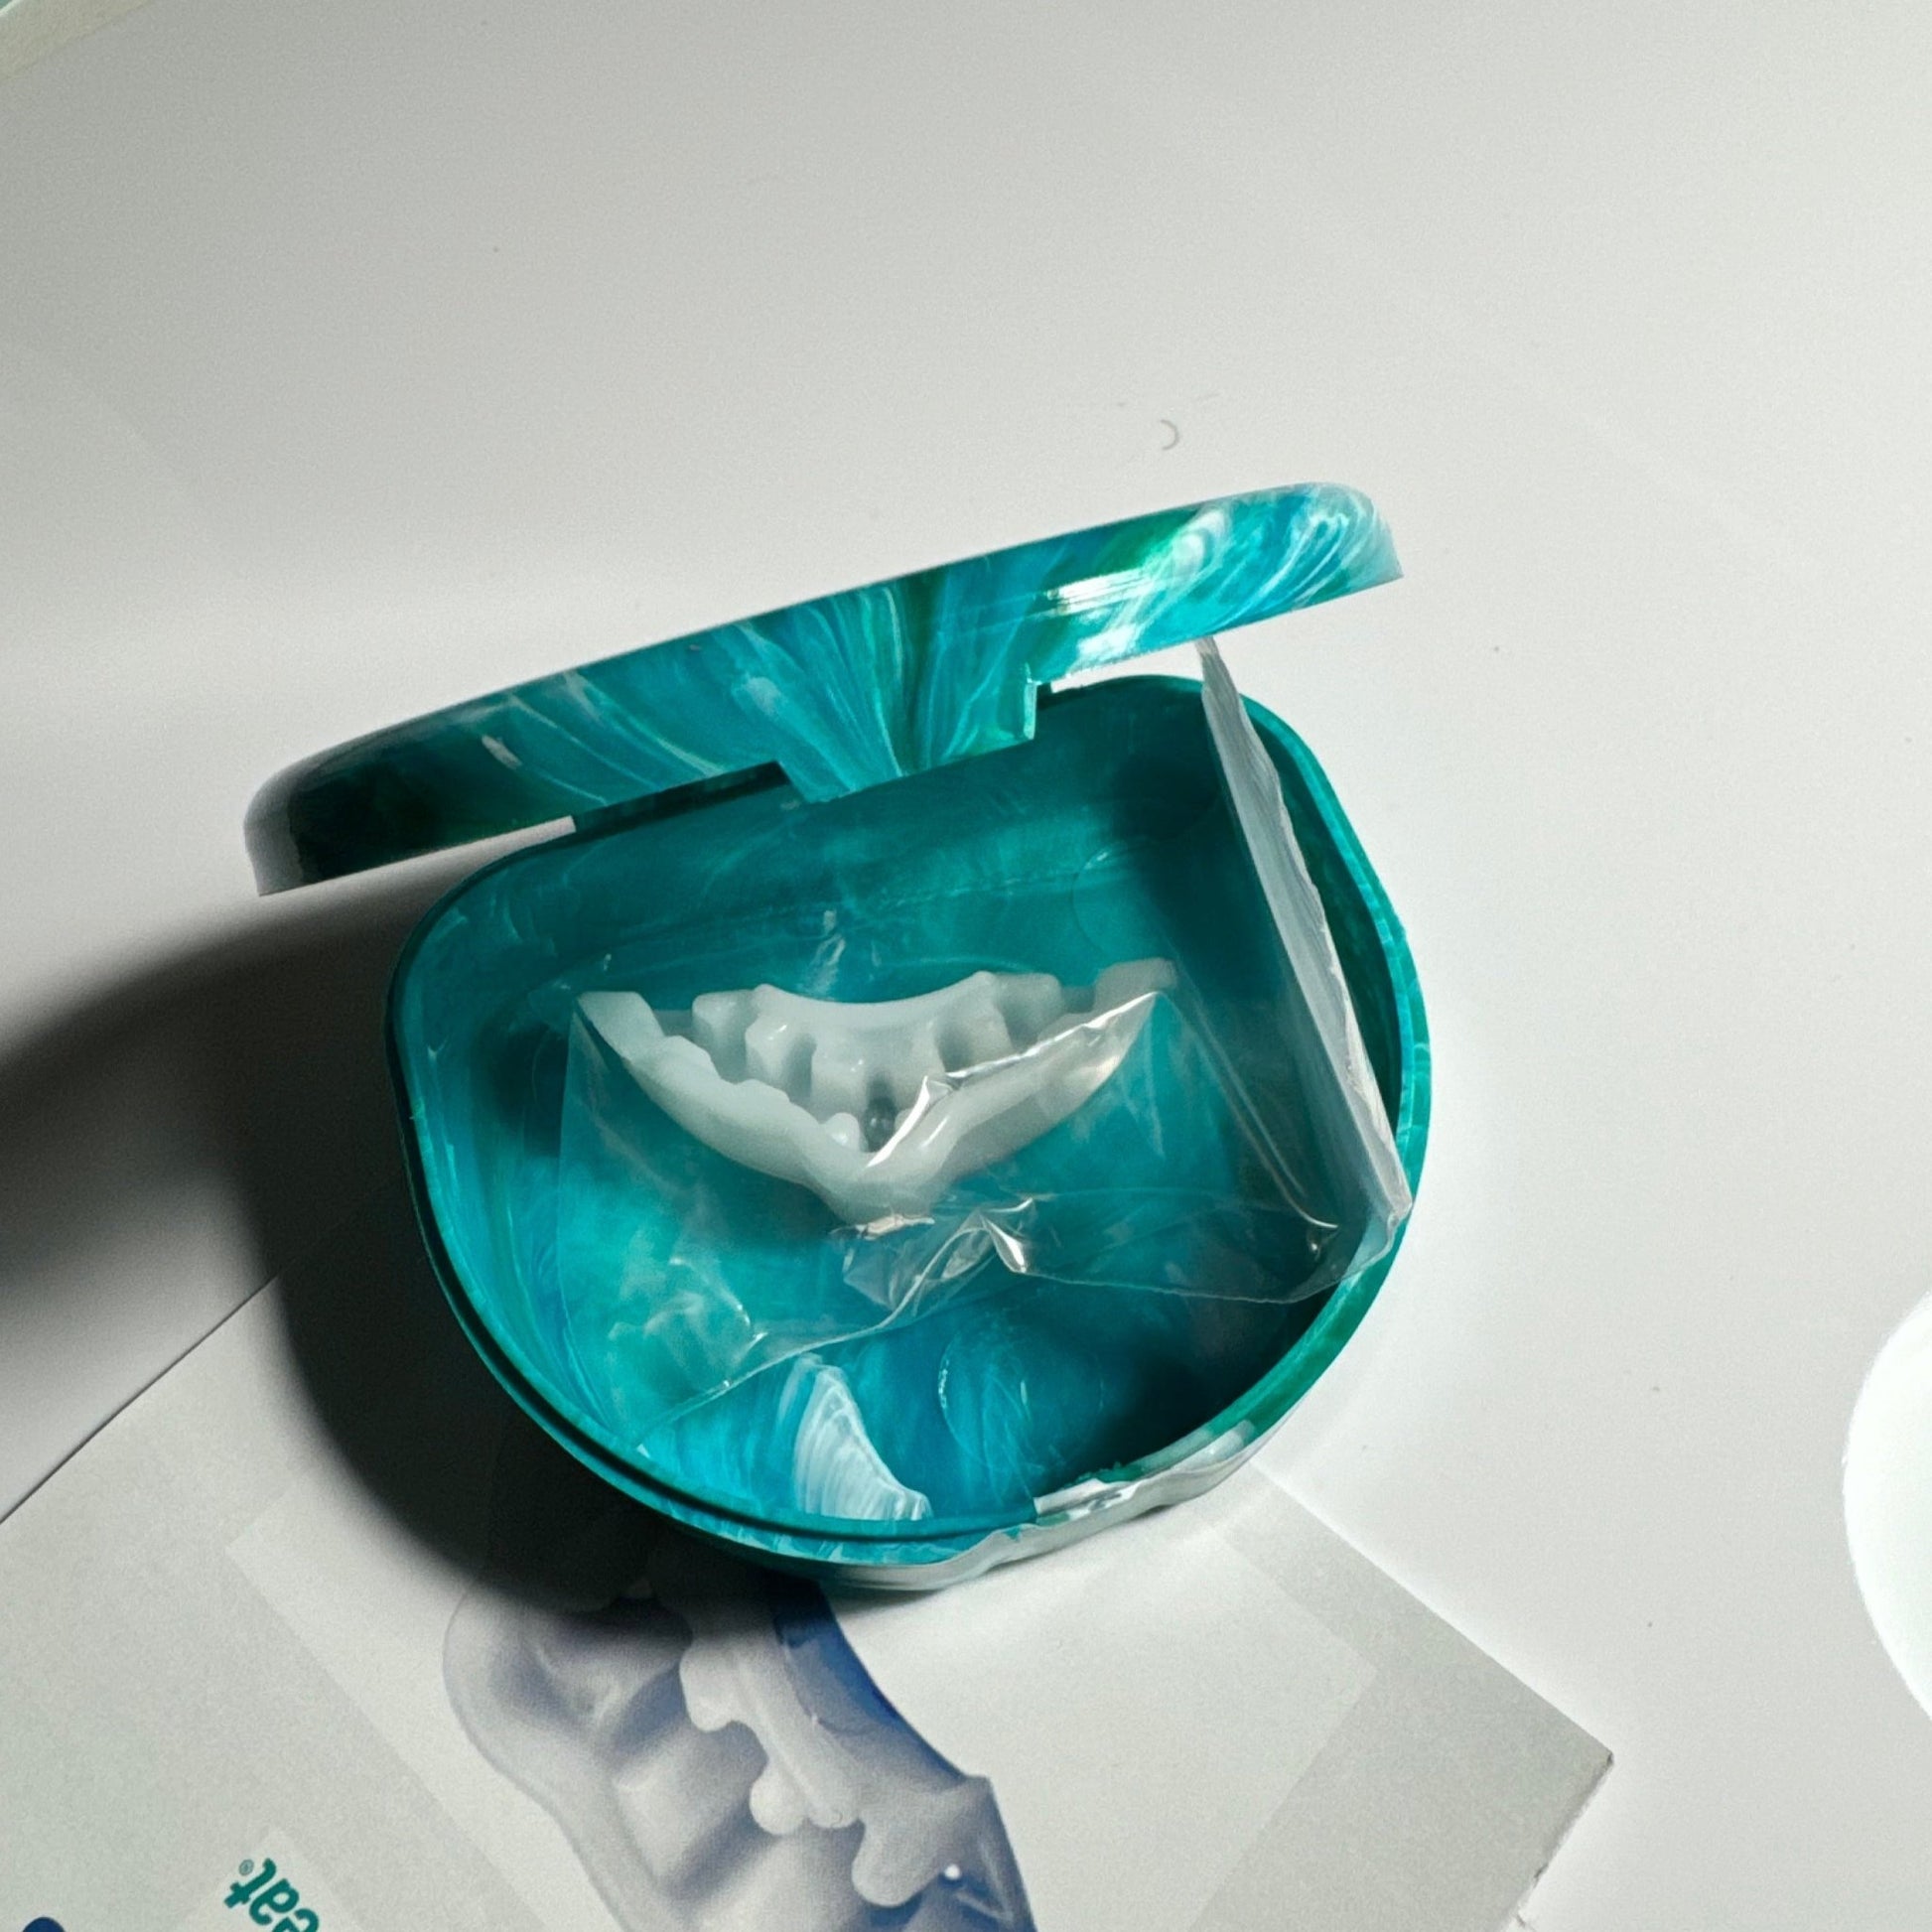 Teeth Guard Case In Turquoise Color - FastSplint